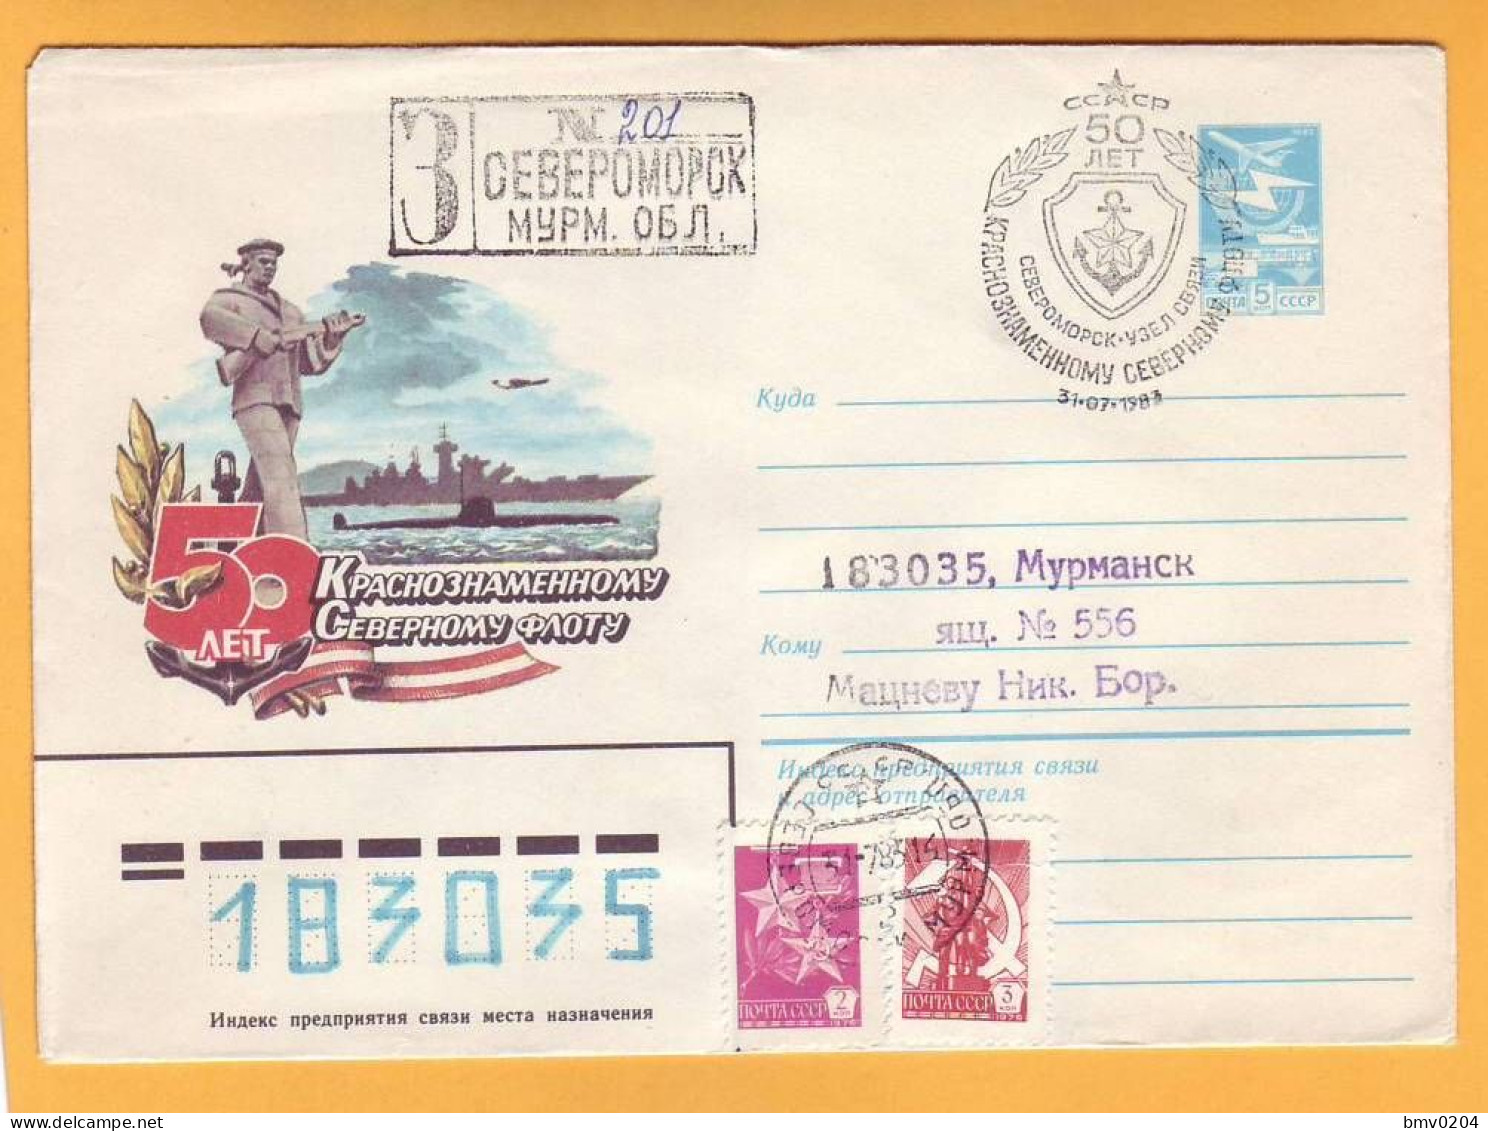 1983 RUSSIA RUSSIE USSR URSS . 50 Years Of The Northern Fleet.  Severomorsk. Special Cancellations. - Sottomarini